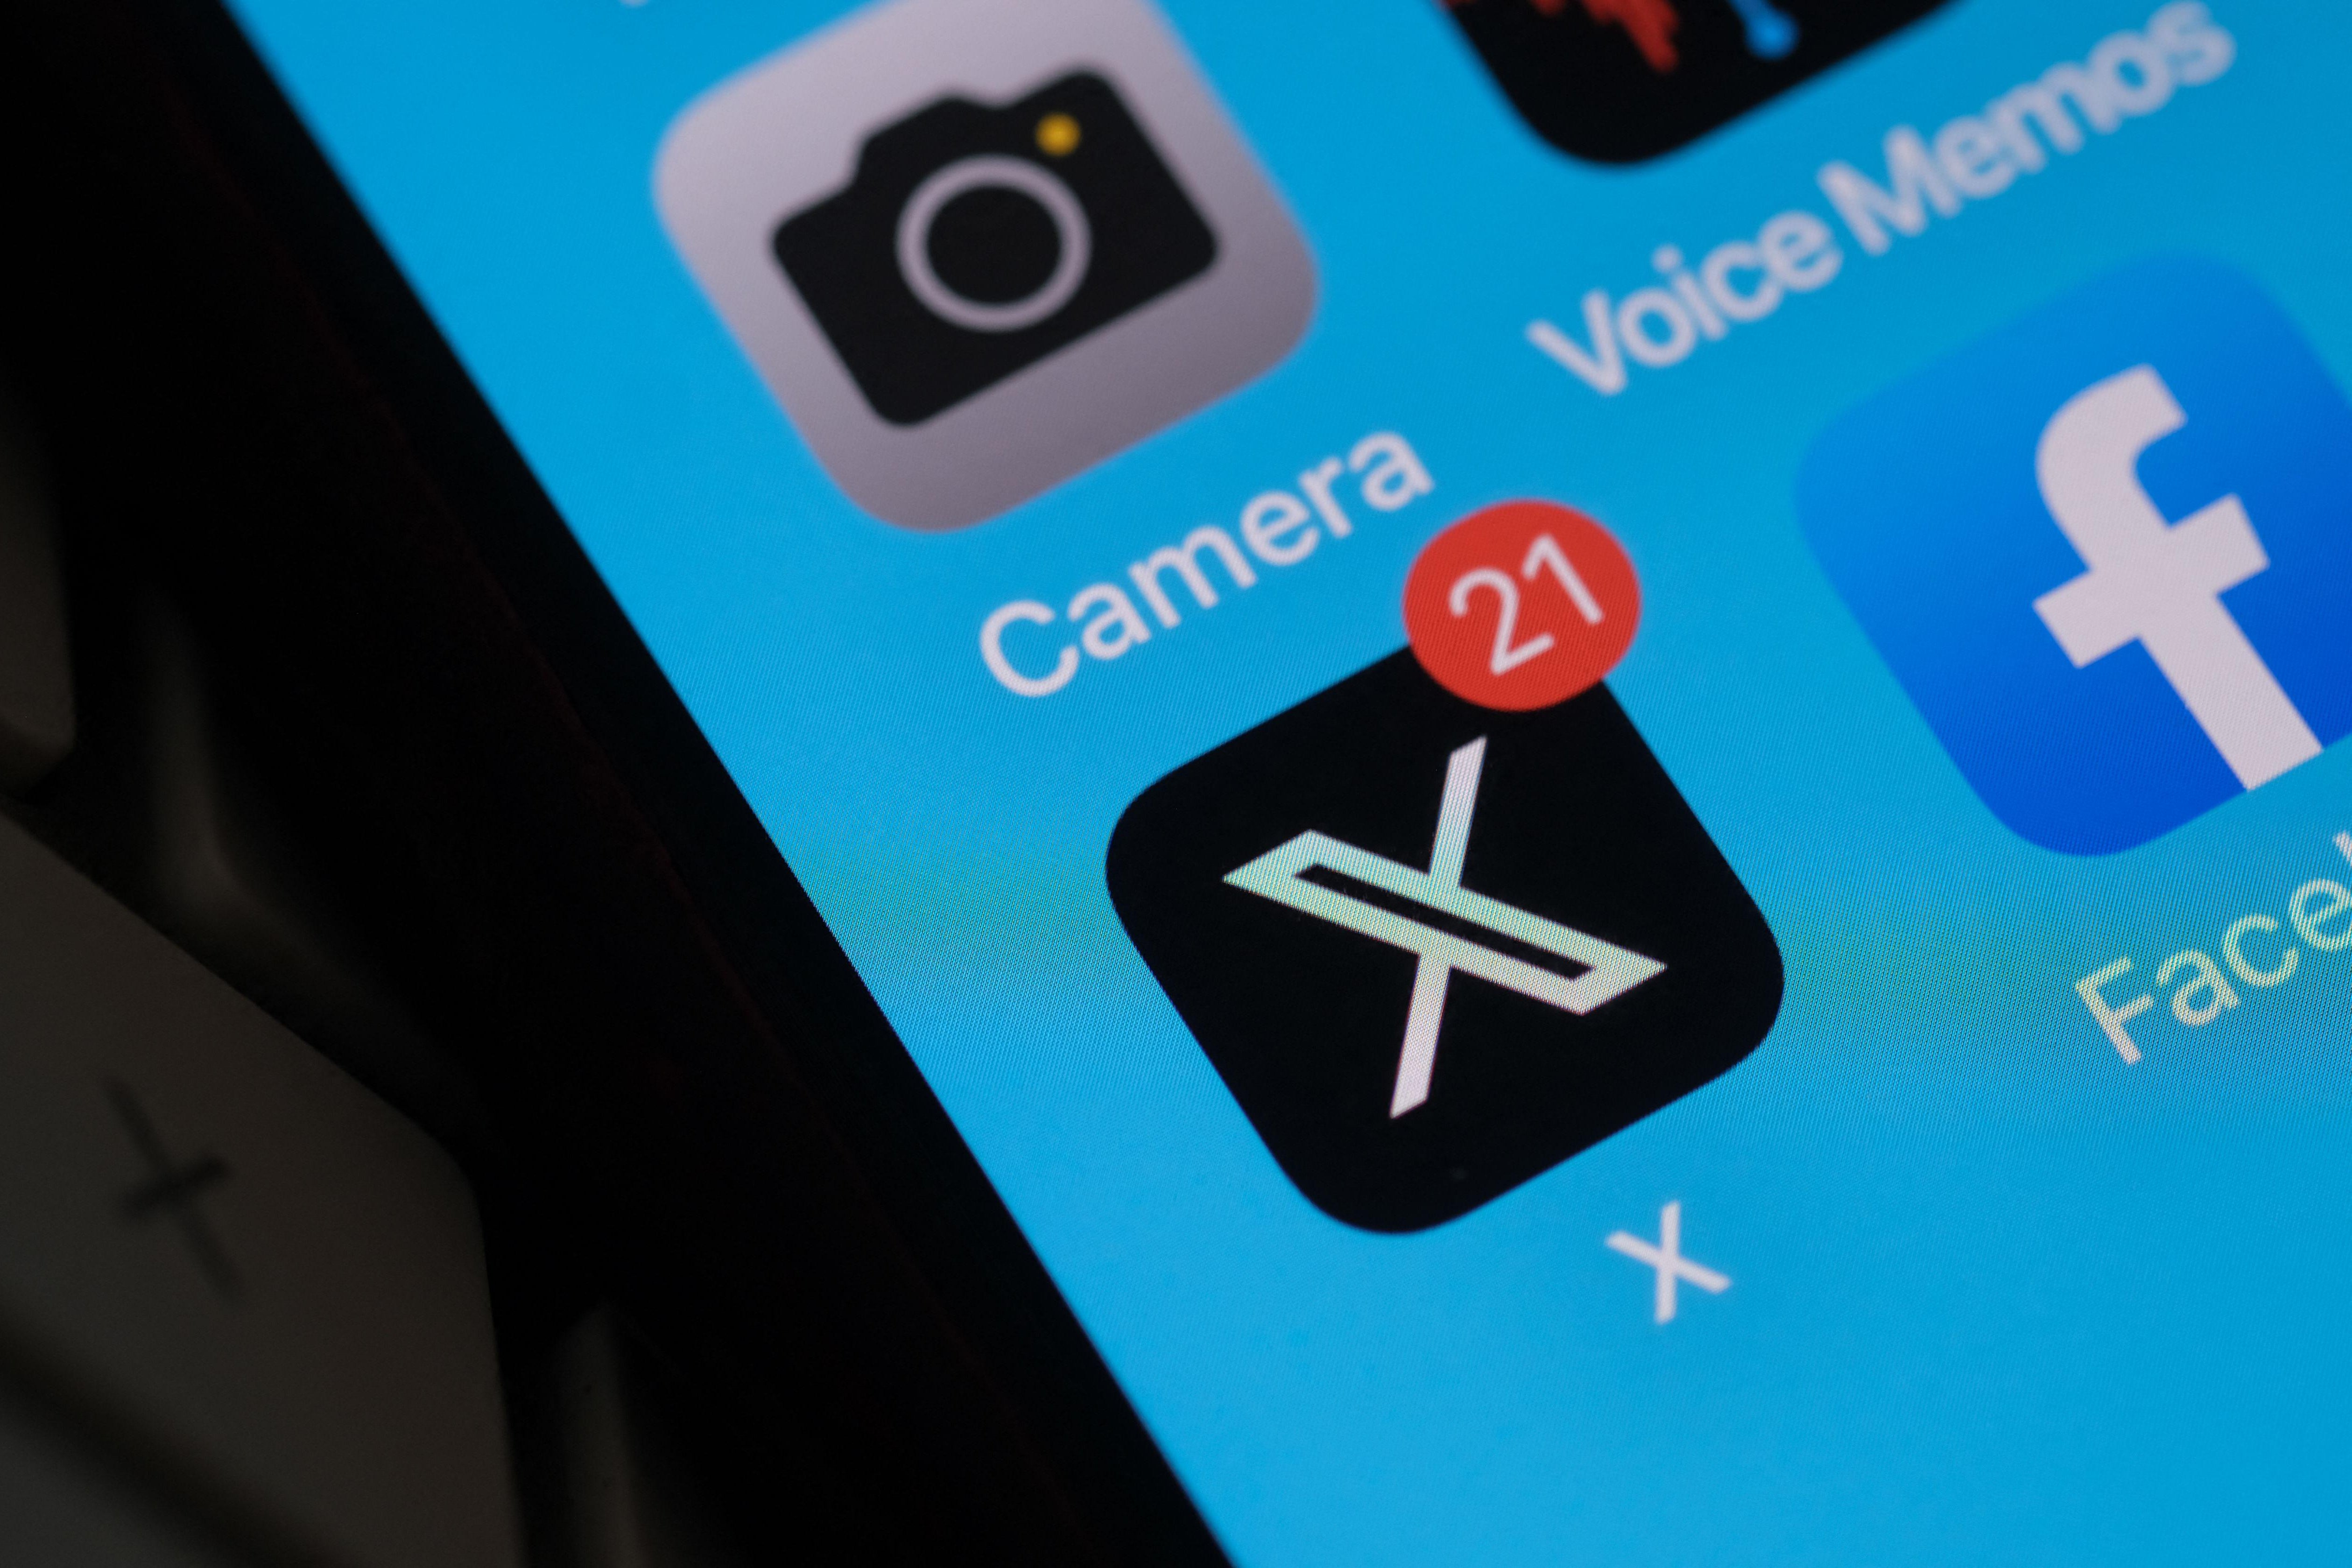 The X app's icon, with a badge displaying the presence of 21 notifications, is seen on an iPhone screen under the Camera app and next to the Facebook app.